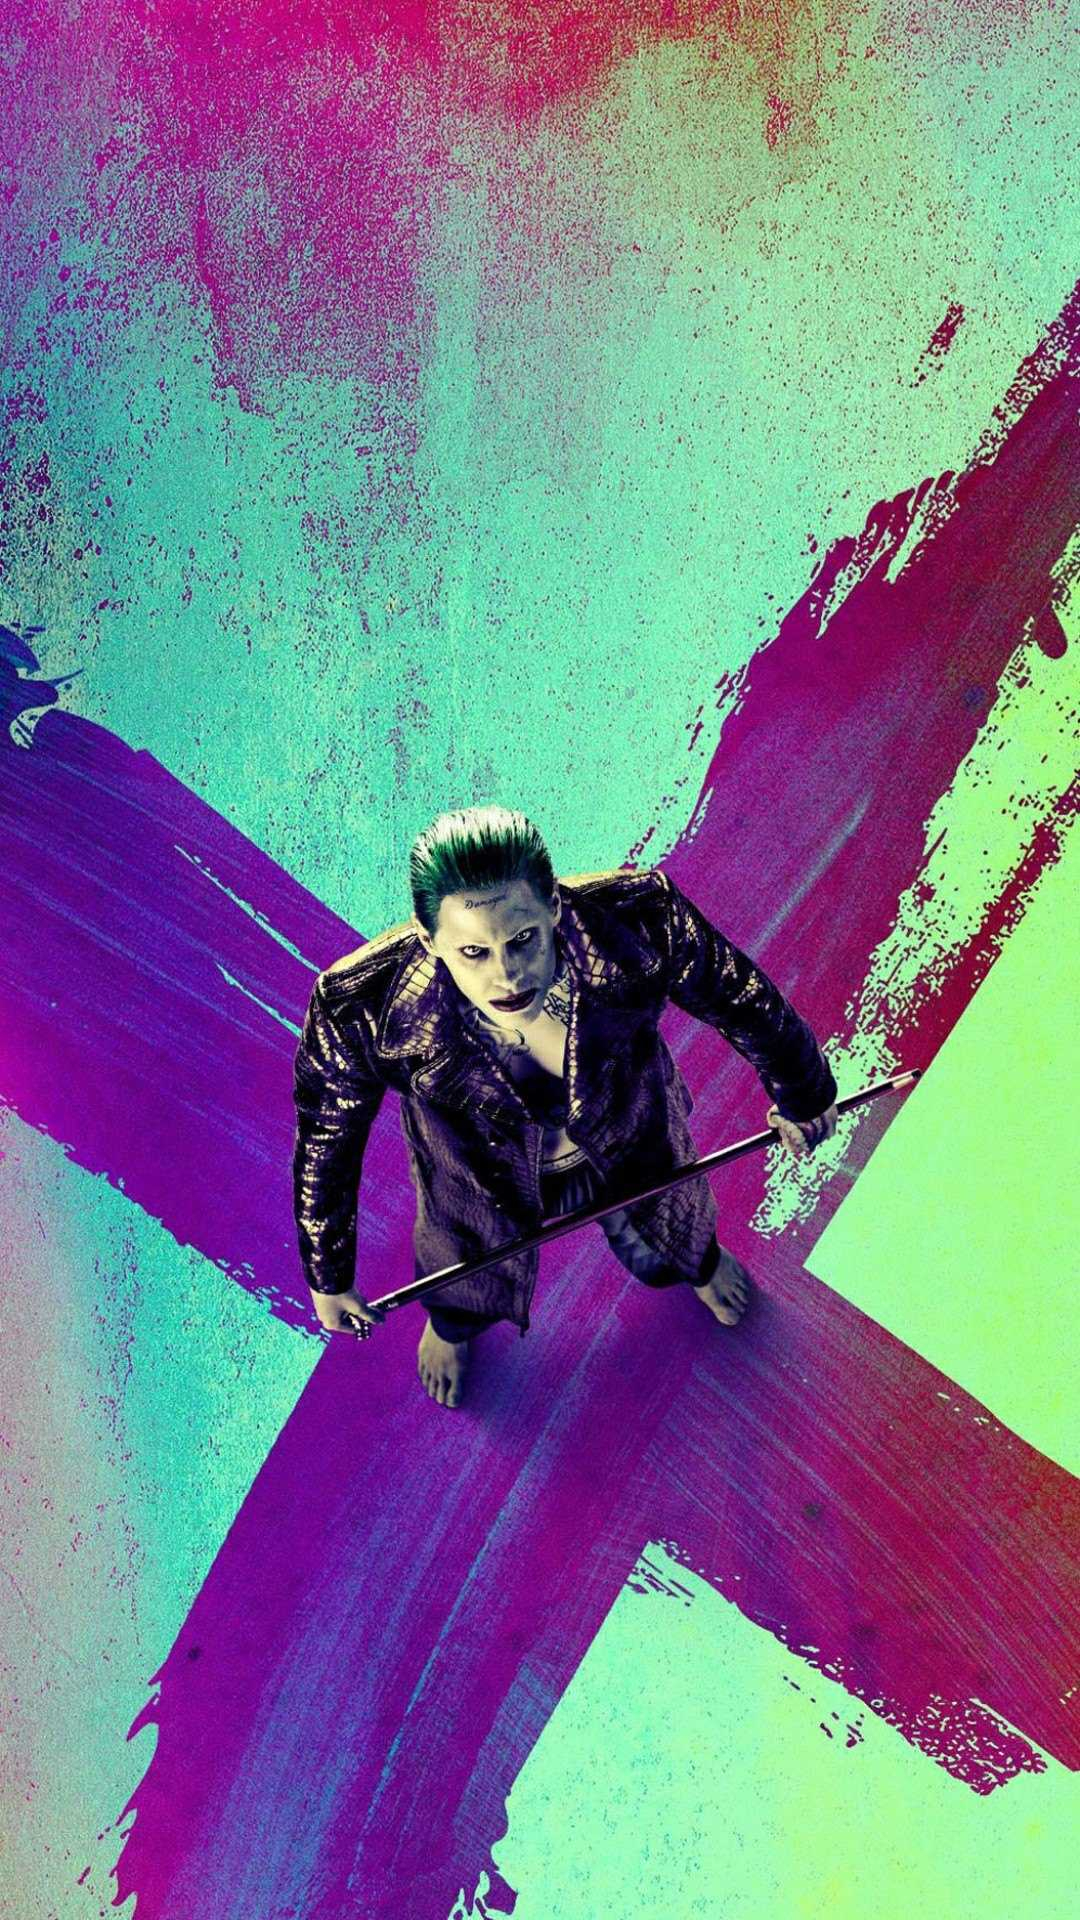 1080x1920 Joker Suicide Squad Wallpaper Awesome Free HD Wallpapers